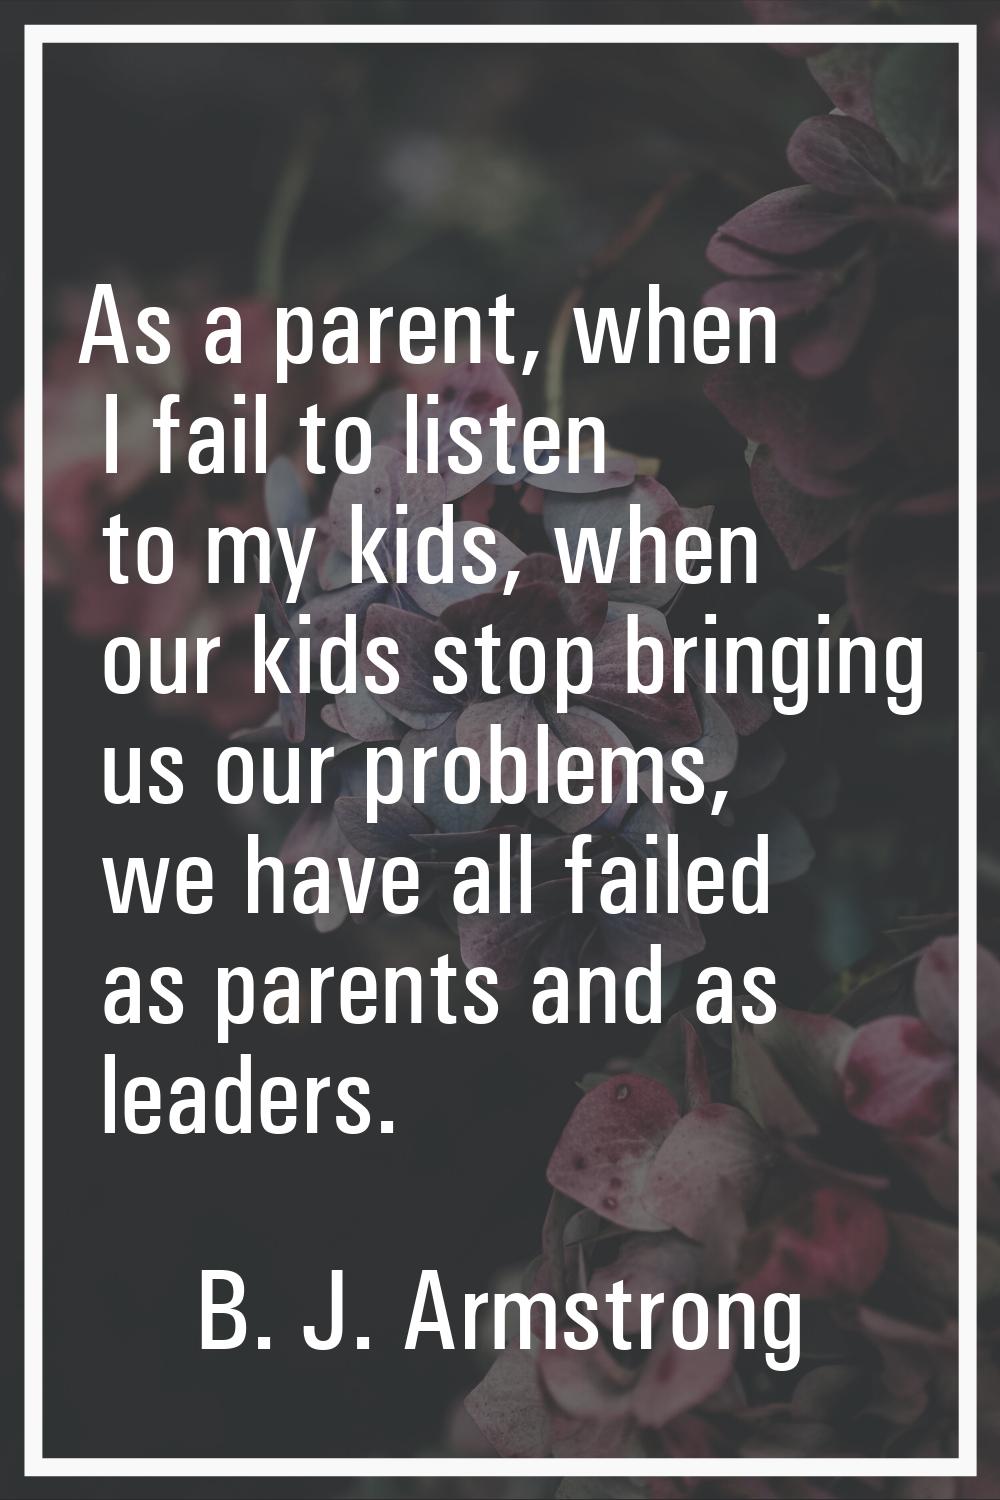 As a parent, when I fail to listen to my kids, when our kids stop bringing us our problems, we have